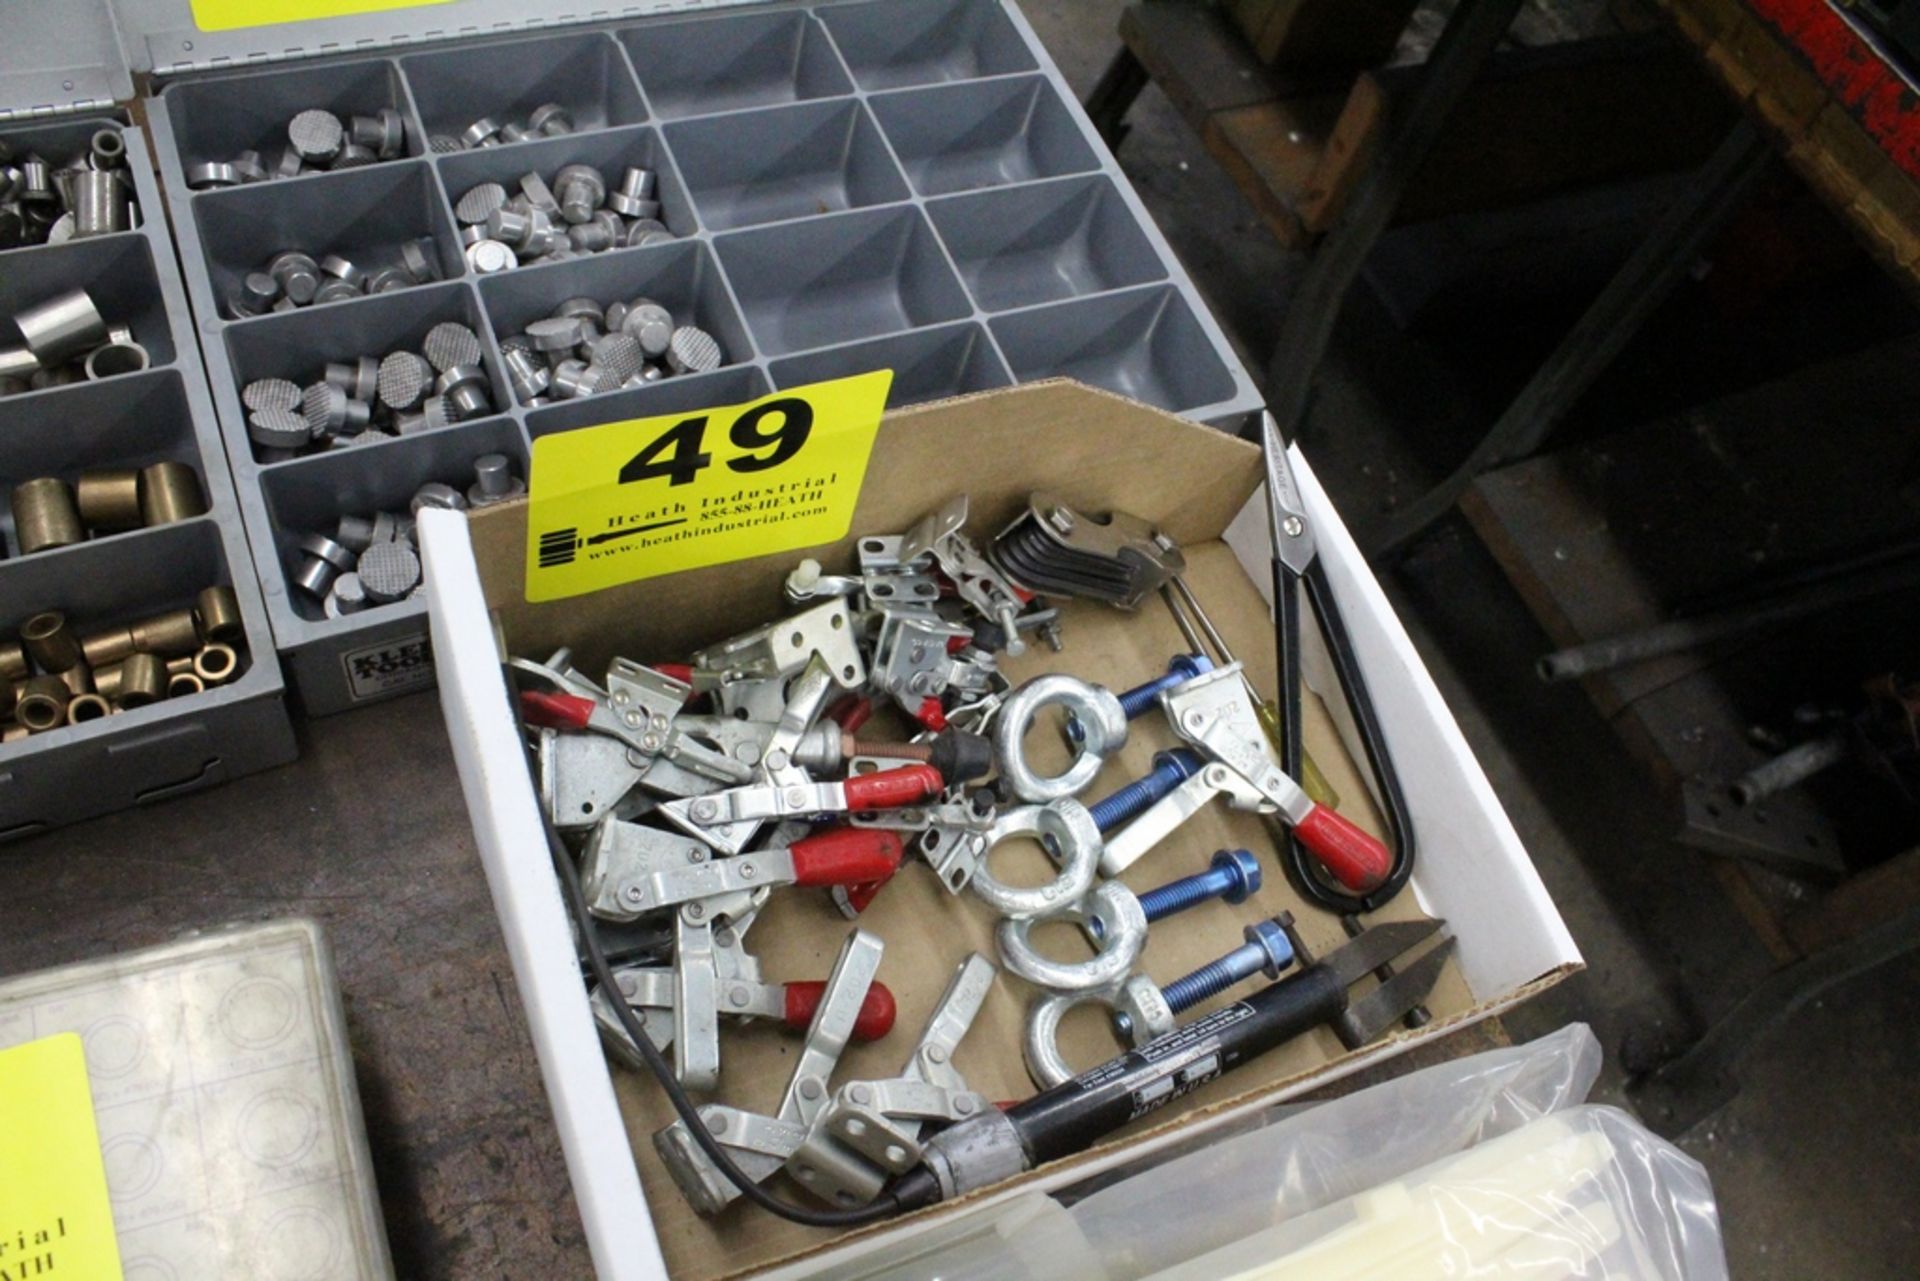 TOGGLE CLAMPS, EYE BOLTS, ETC IN BOX